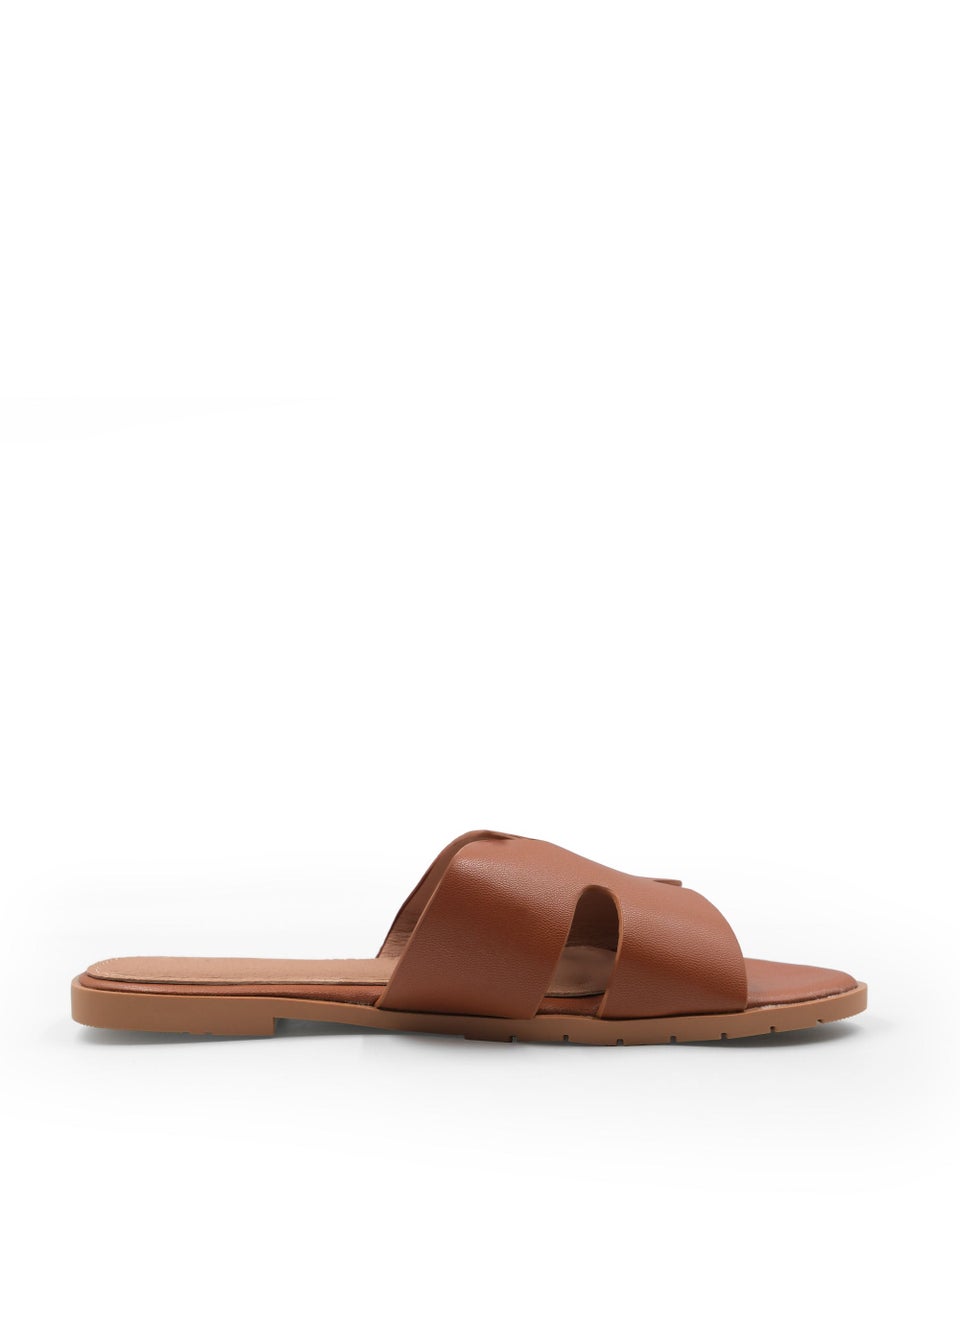 Where's That From Tan Pu Mae Strapped Slider Sandals